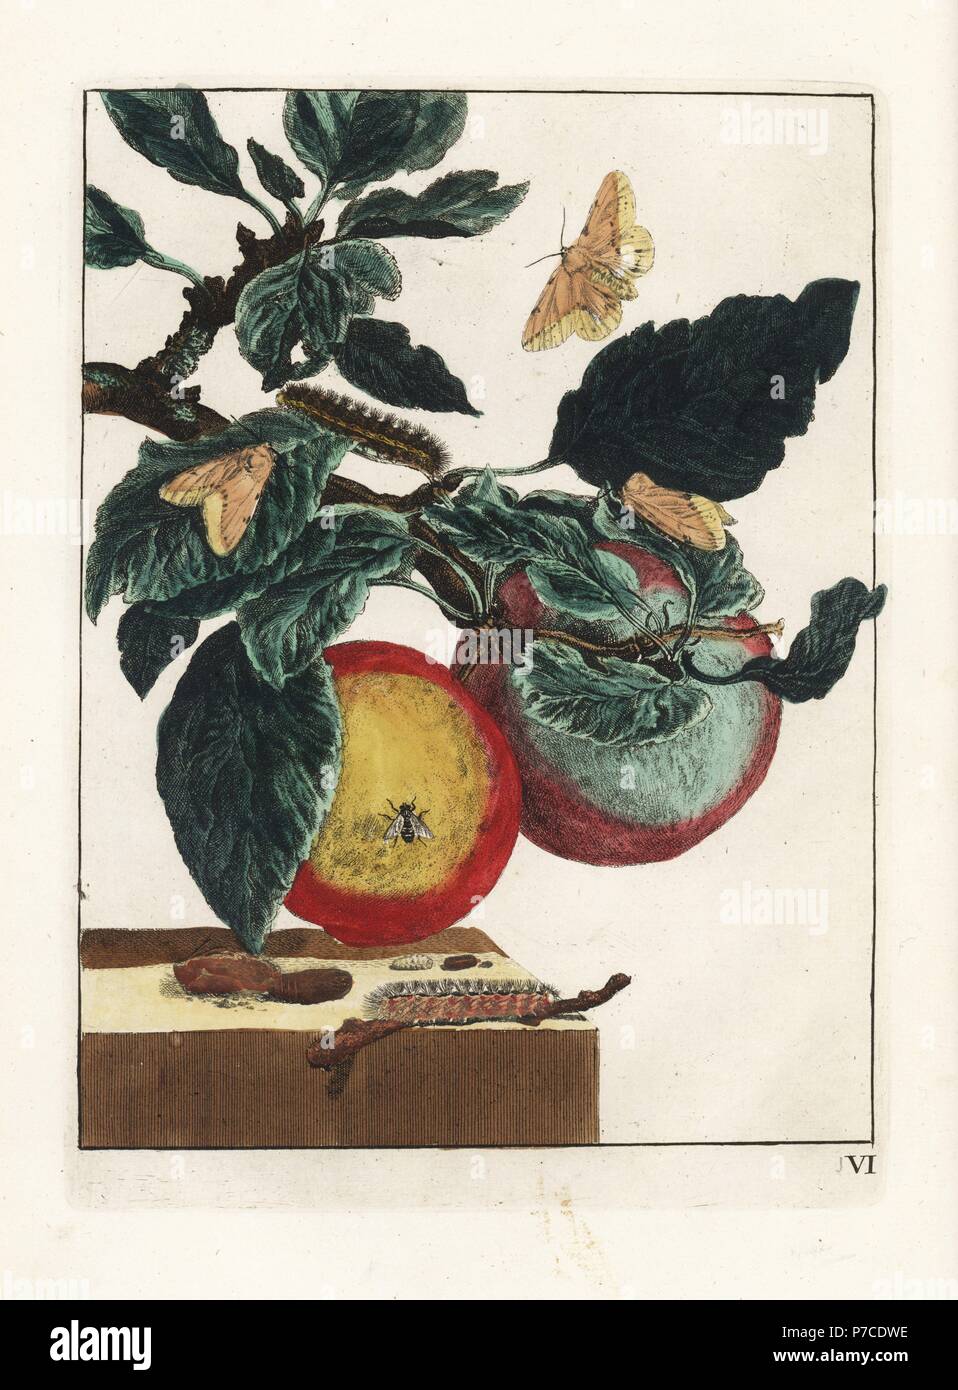 White ermine moth, Spilosoma lubricipeda, and common housefly on an apple branch, Malus domestica. Handcoloured copperplate engraving drawn and etched by Jacob l'Admiral in Naauwkeurige Waarneemingen omtrent de veranderingen van veele Insekten (Accurate Descriptions of the Metamorphoses of Insects), J. Sluyter, Amsterdam, 1774. For this second edition, M. Houttuyn added another eight plates to the original 25. Stock Photo